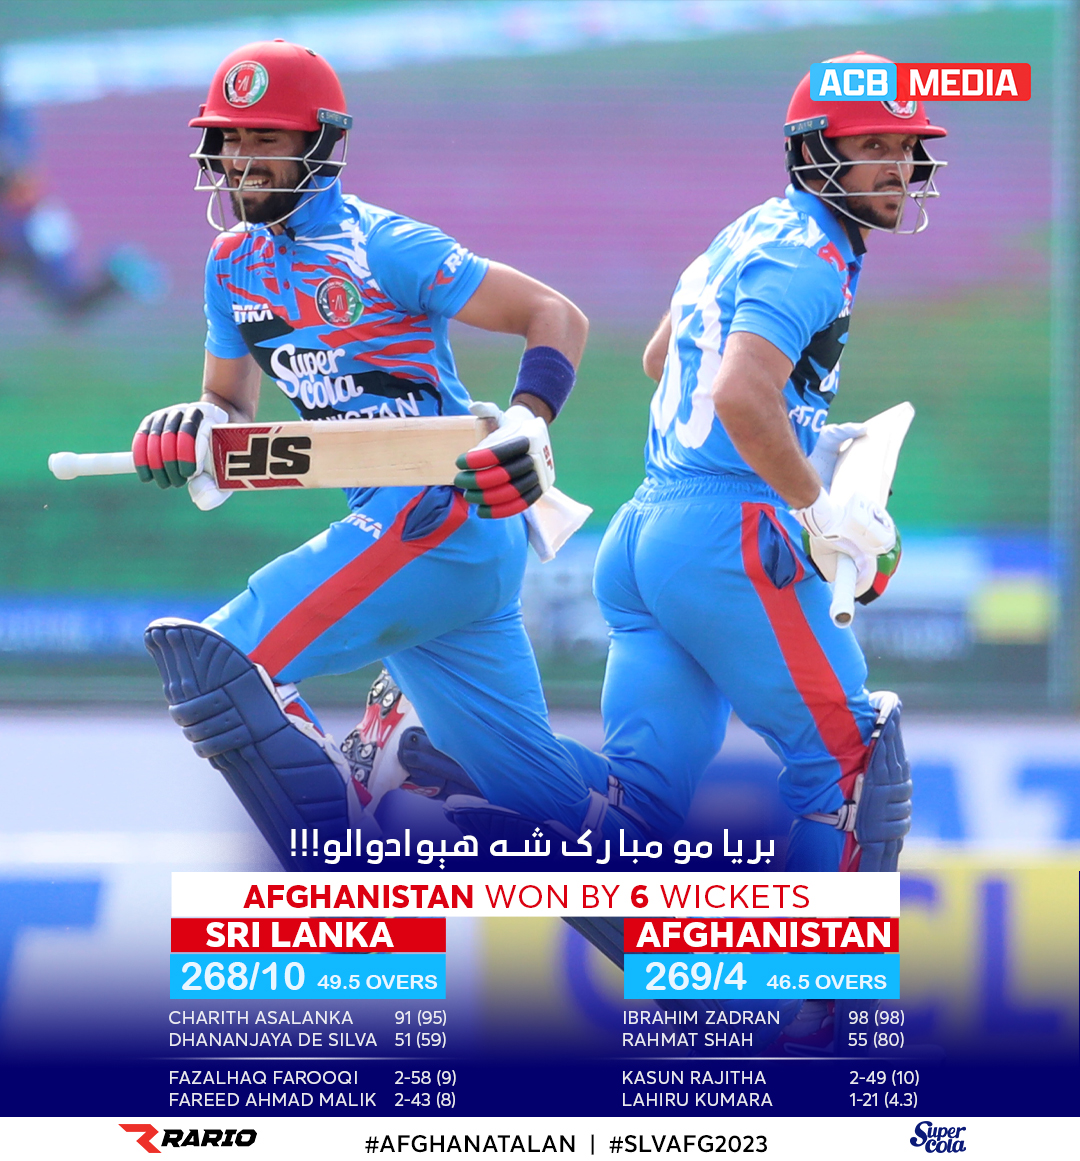 𝐖𝐡𝐚𝐭 𝐚 𝐖𝐈𝐍!!! 🙌 AfghanAtalan have successfully chased down the 269-run target and won the 1st ODI by 6 wickets. What an incredible all-round display this has been! 💪 Congratulations to everyone. 🤩👏 #AfghanAtalan | #SLvAFG2023 | #SuperCola